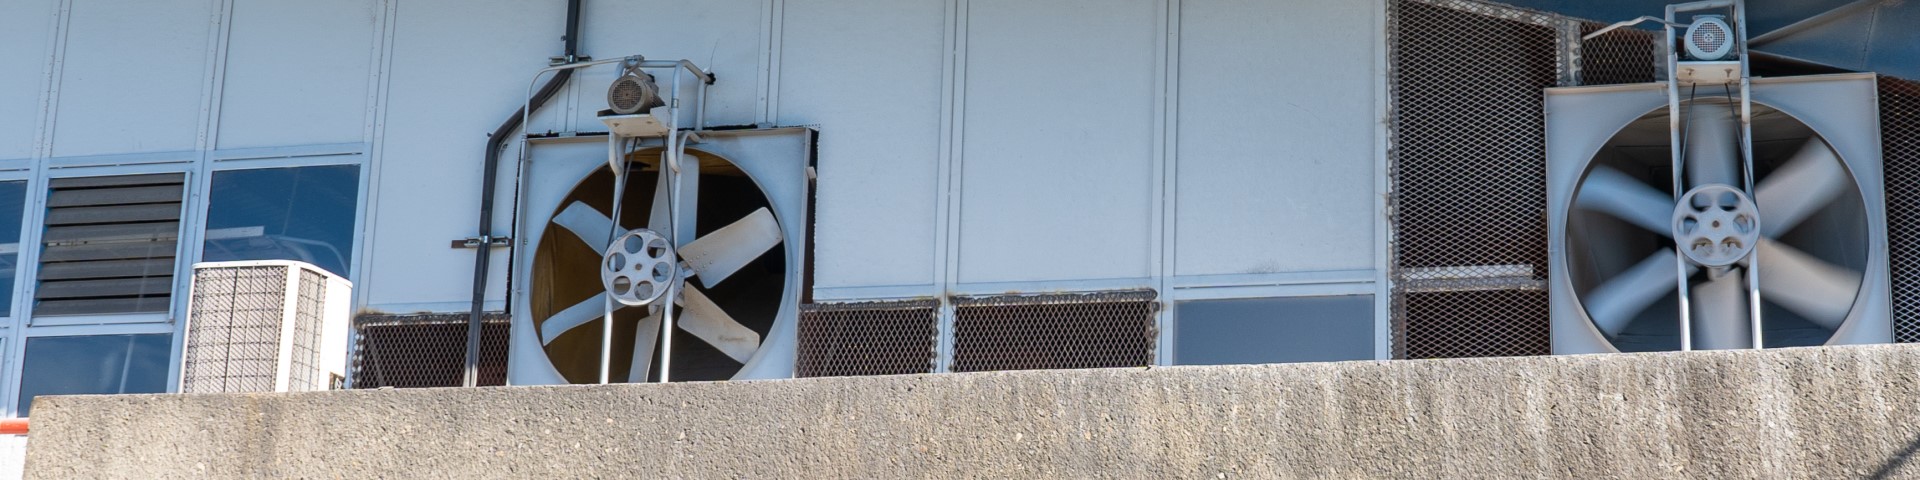 Ventilation systems on a building